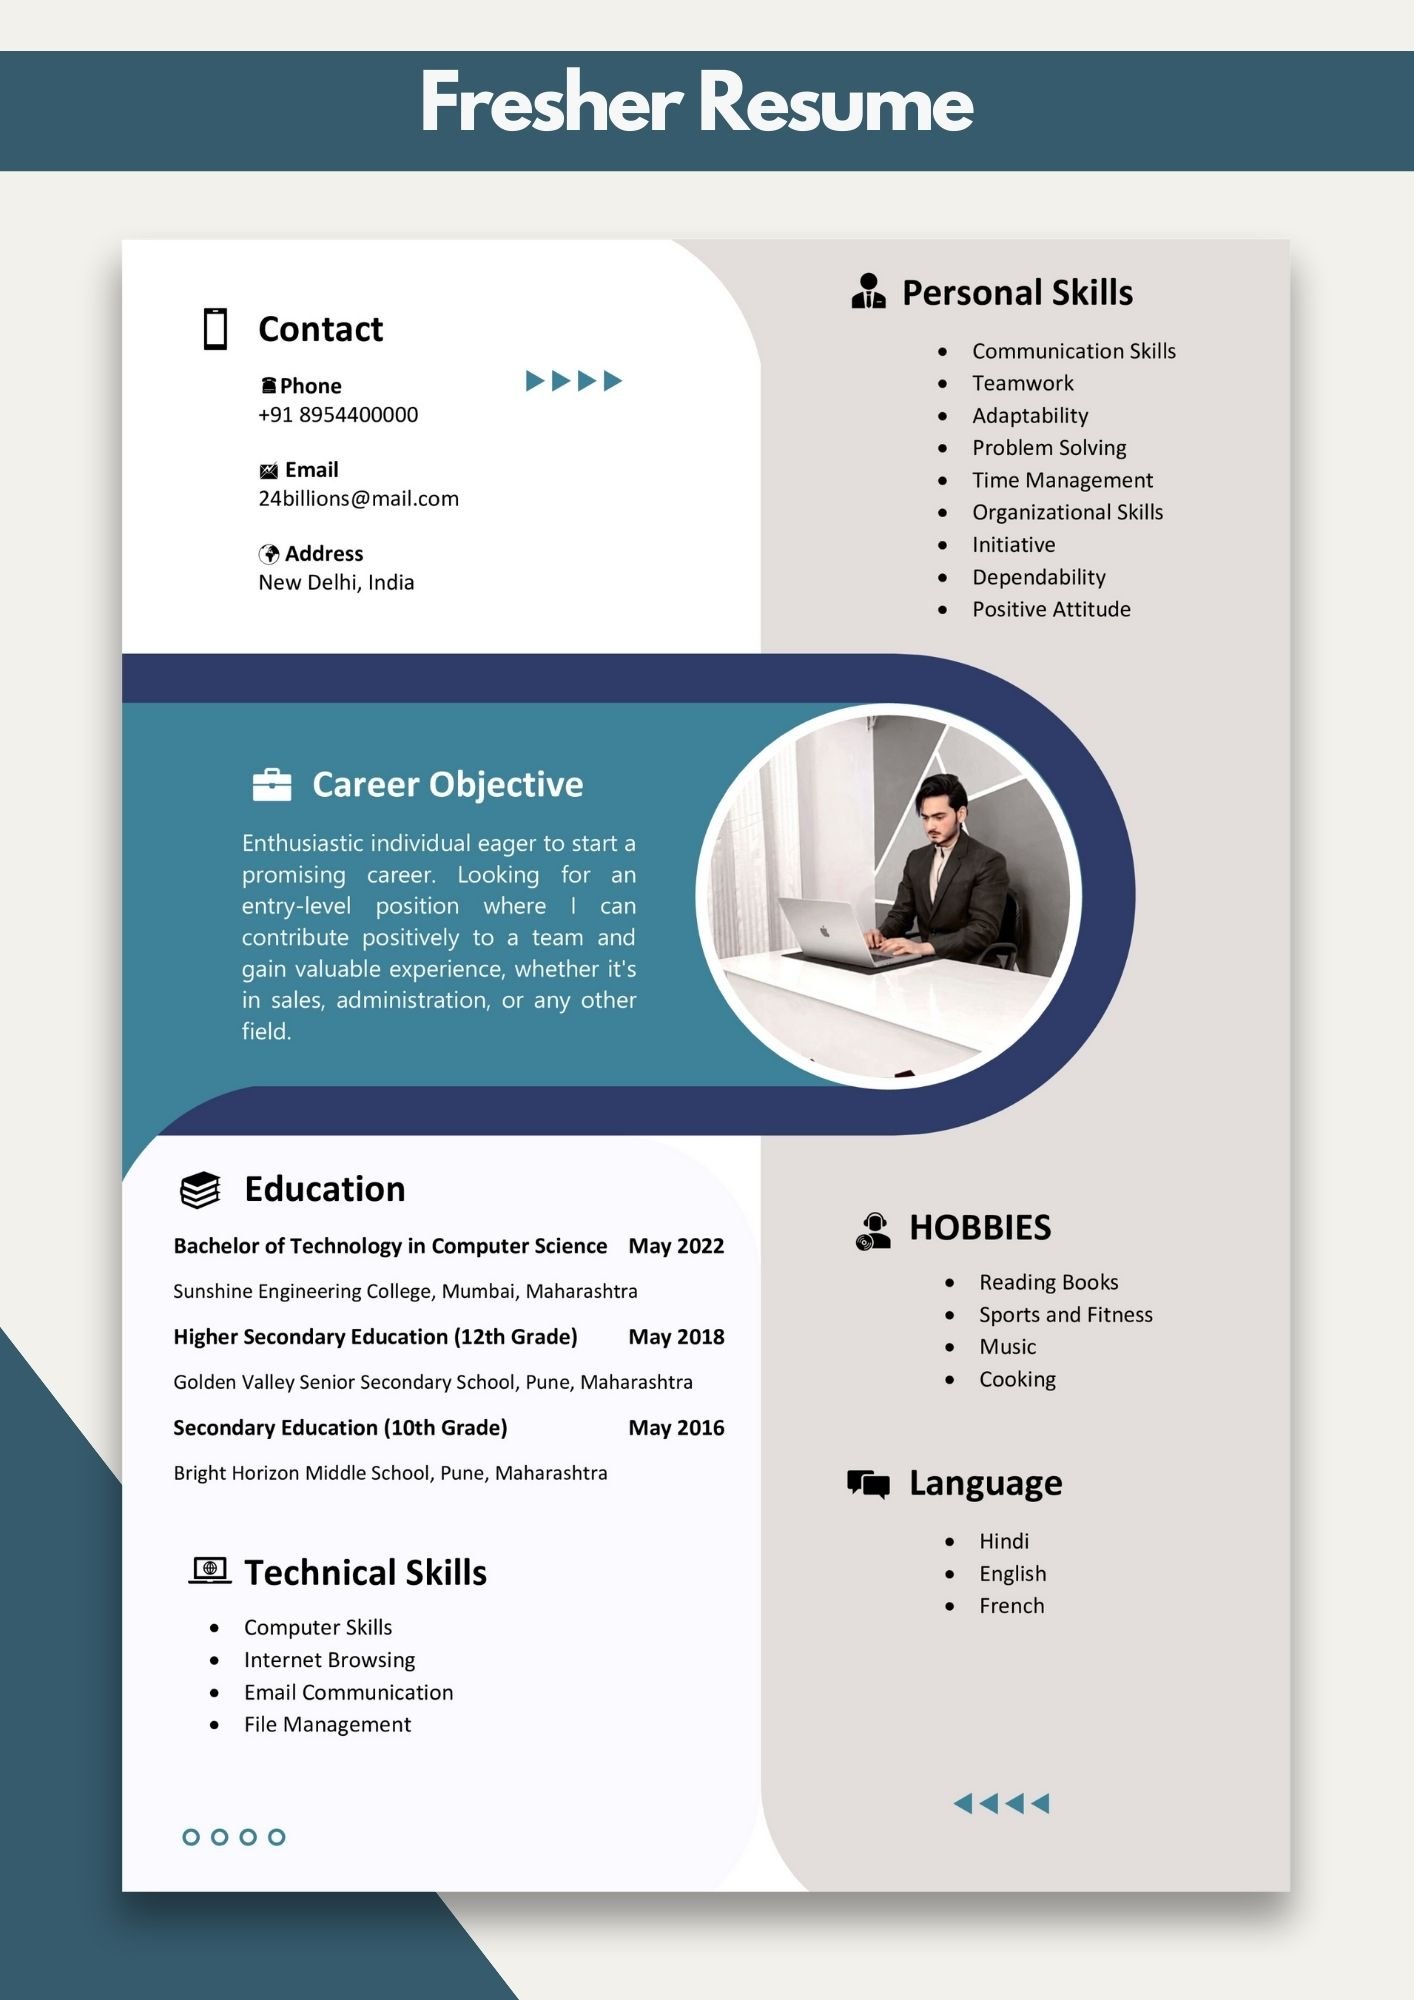 Free Resume Design Download for Fresher